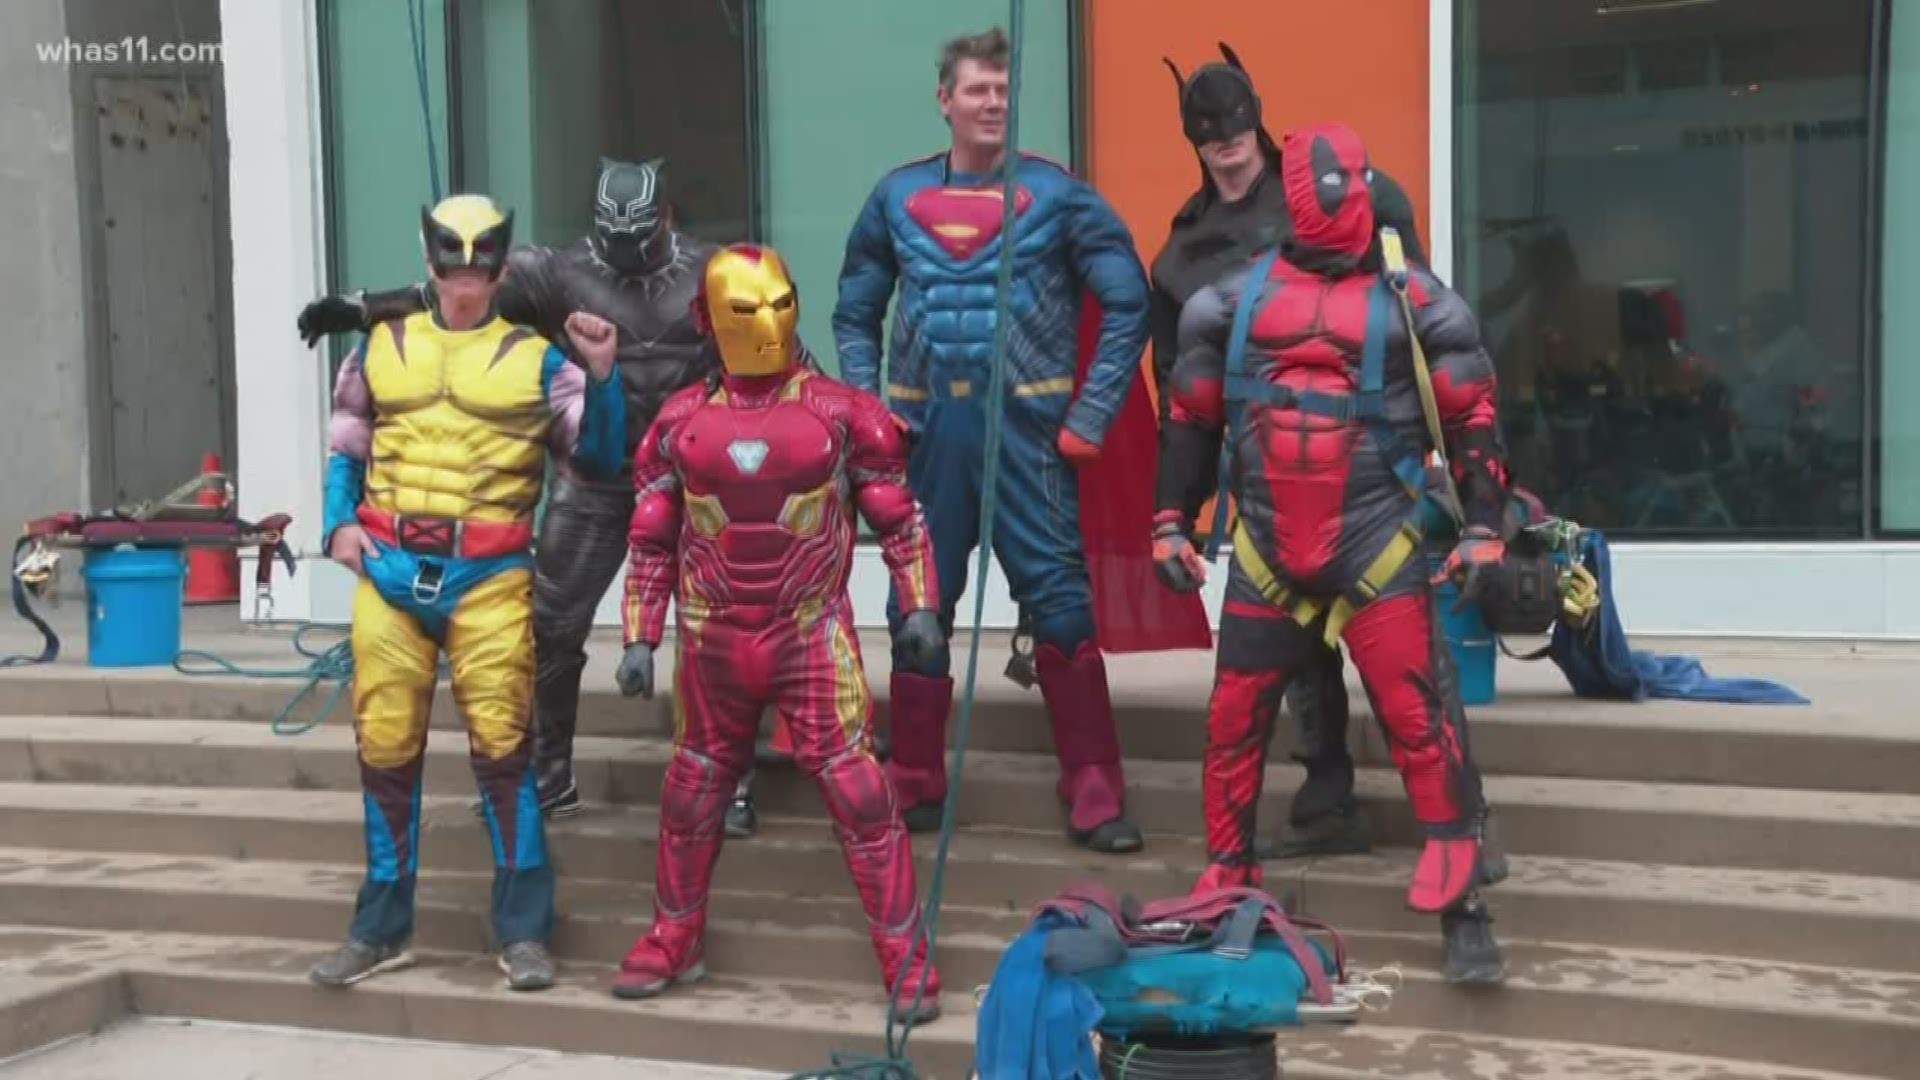 The crew from Pro Clean International put on Superman, Black Panther and Batman costumes at 9 a.m. as they scaled the hospital walls.